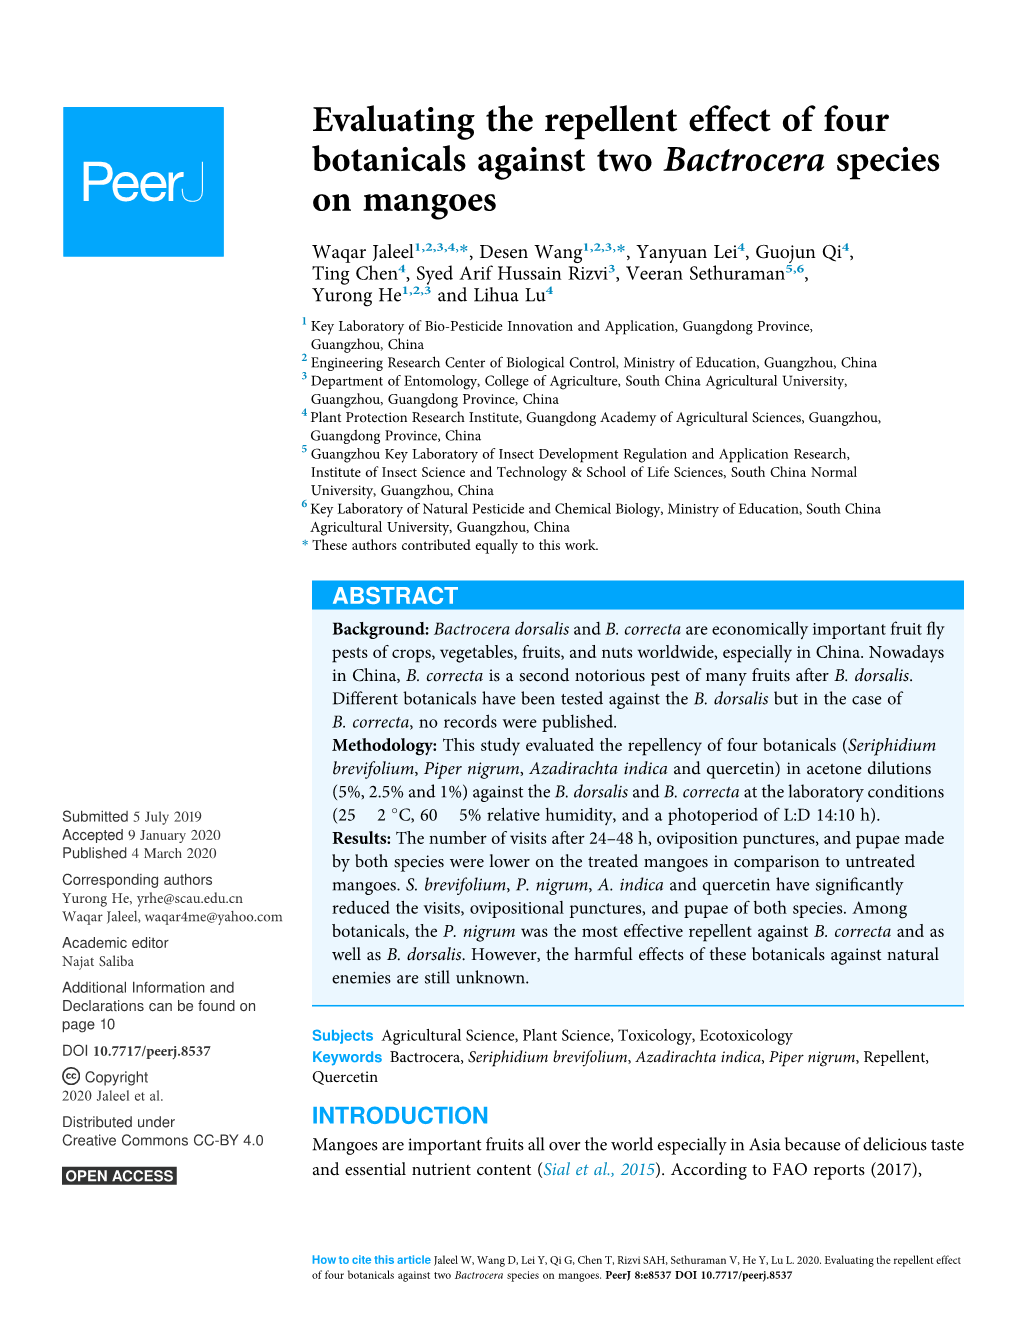 Evaluating the Repellent Effect of Four Botanicals Against Two Bactrocera Species on Mangoes